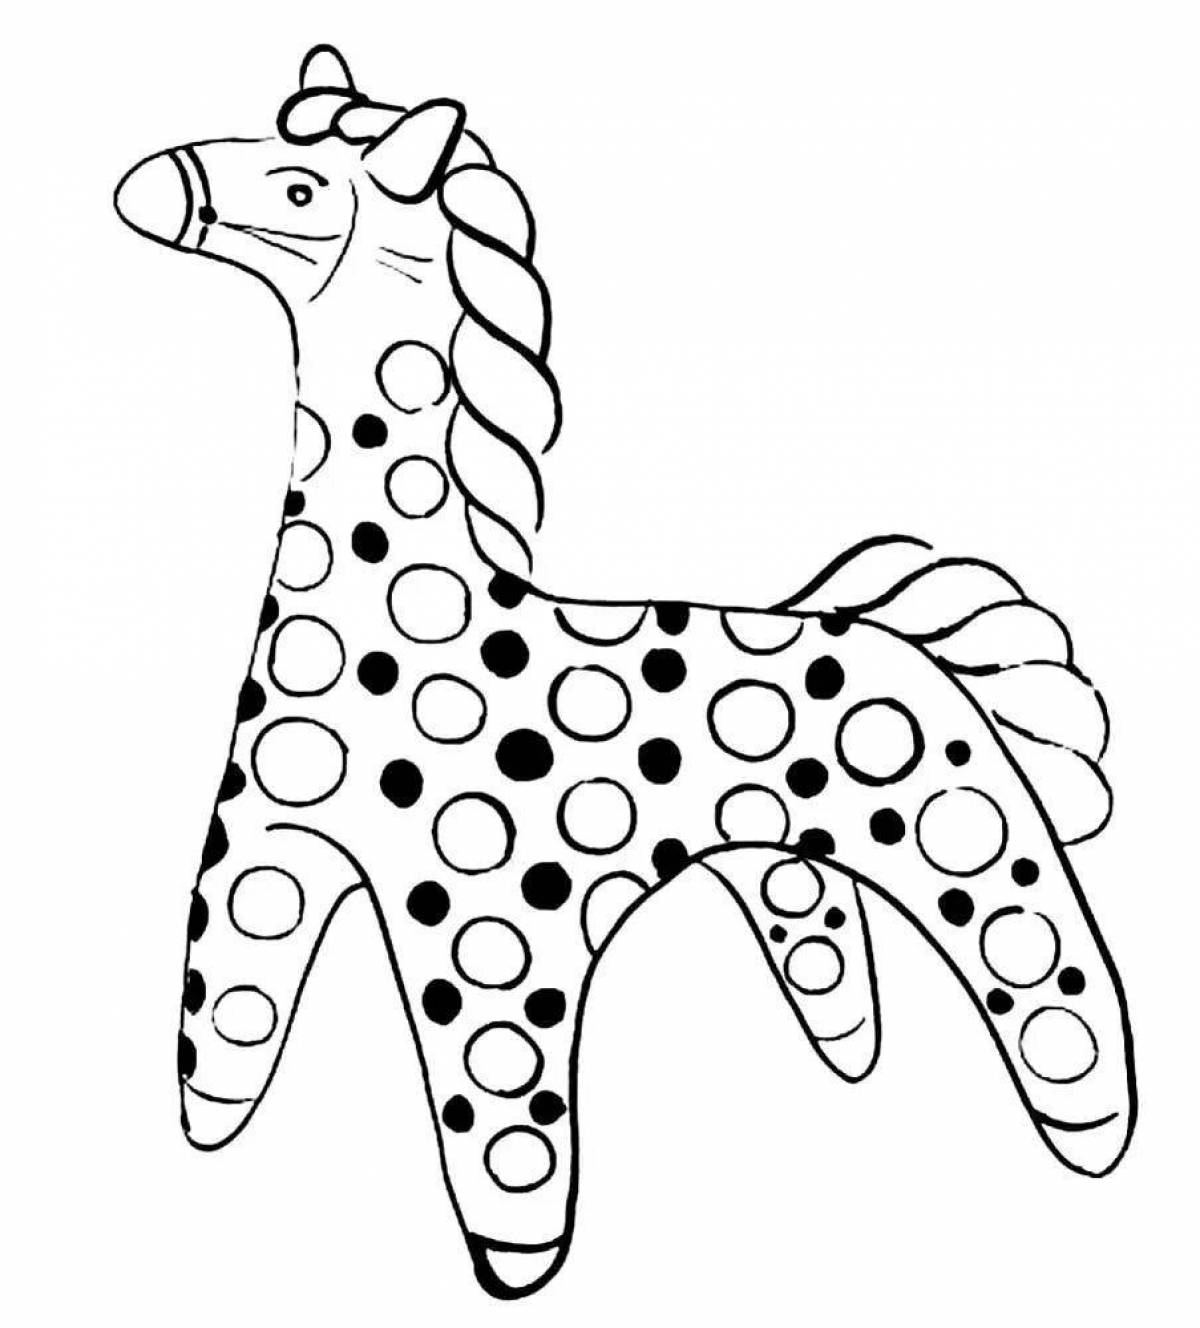 Exquisite Dymkovo horse coloring pages for kids